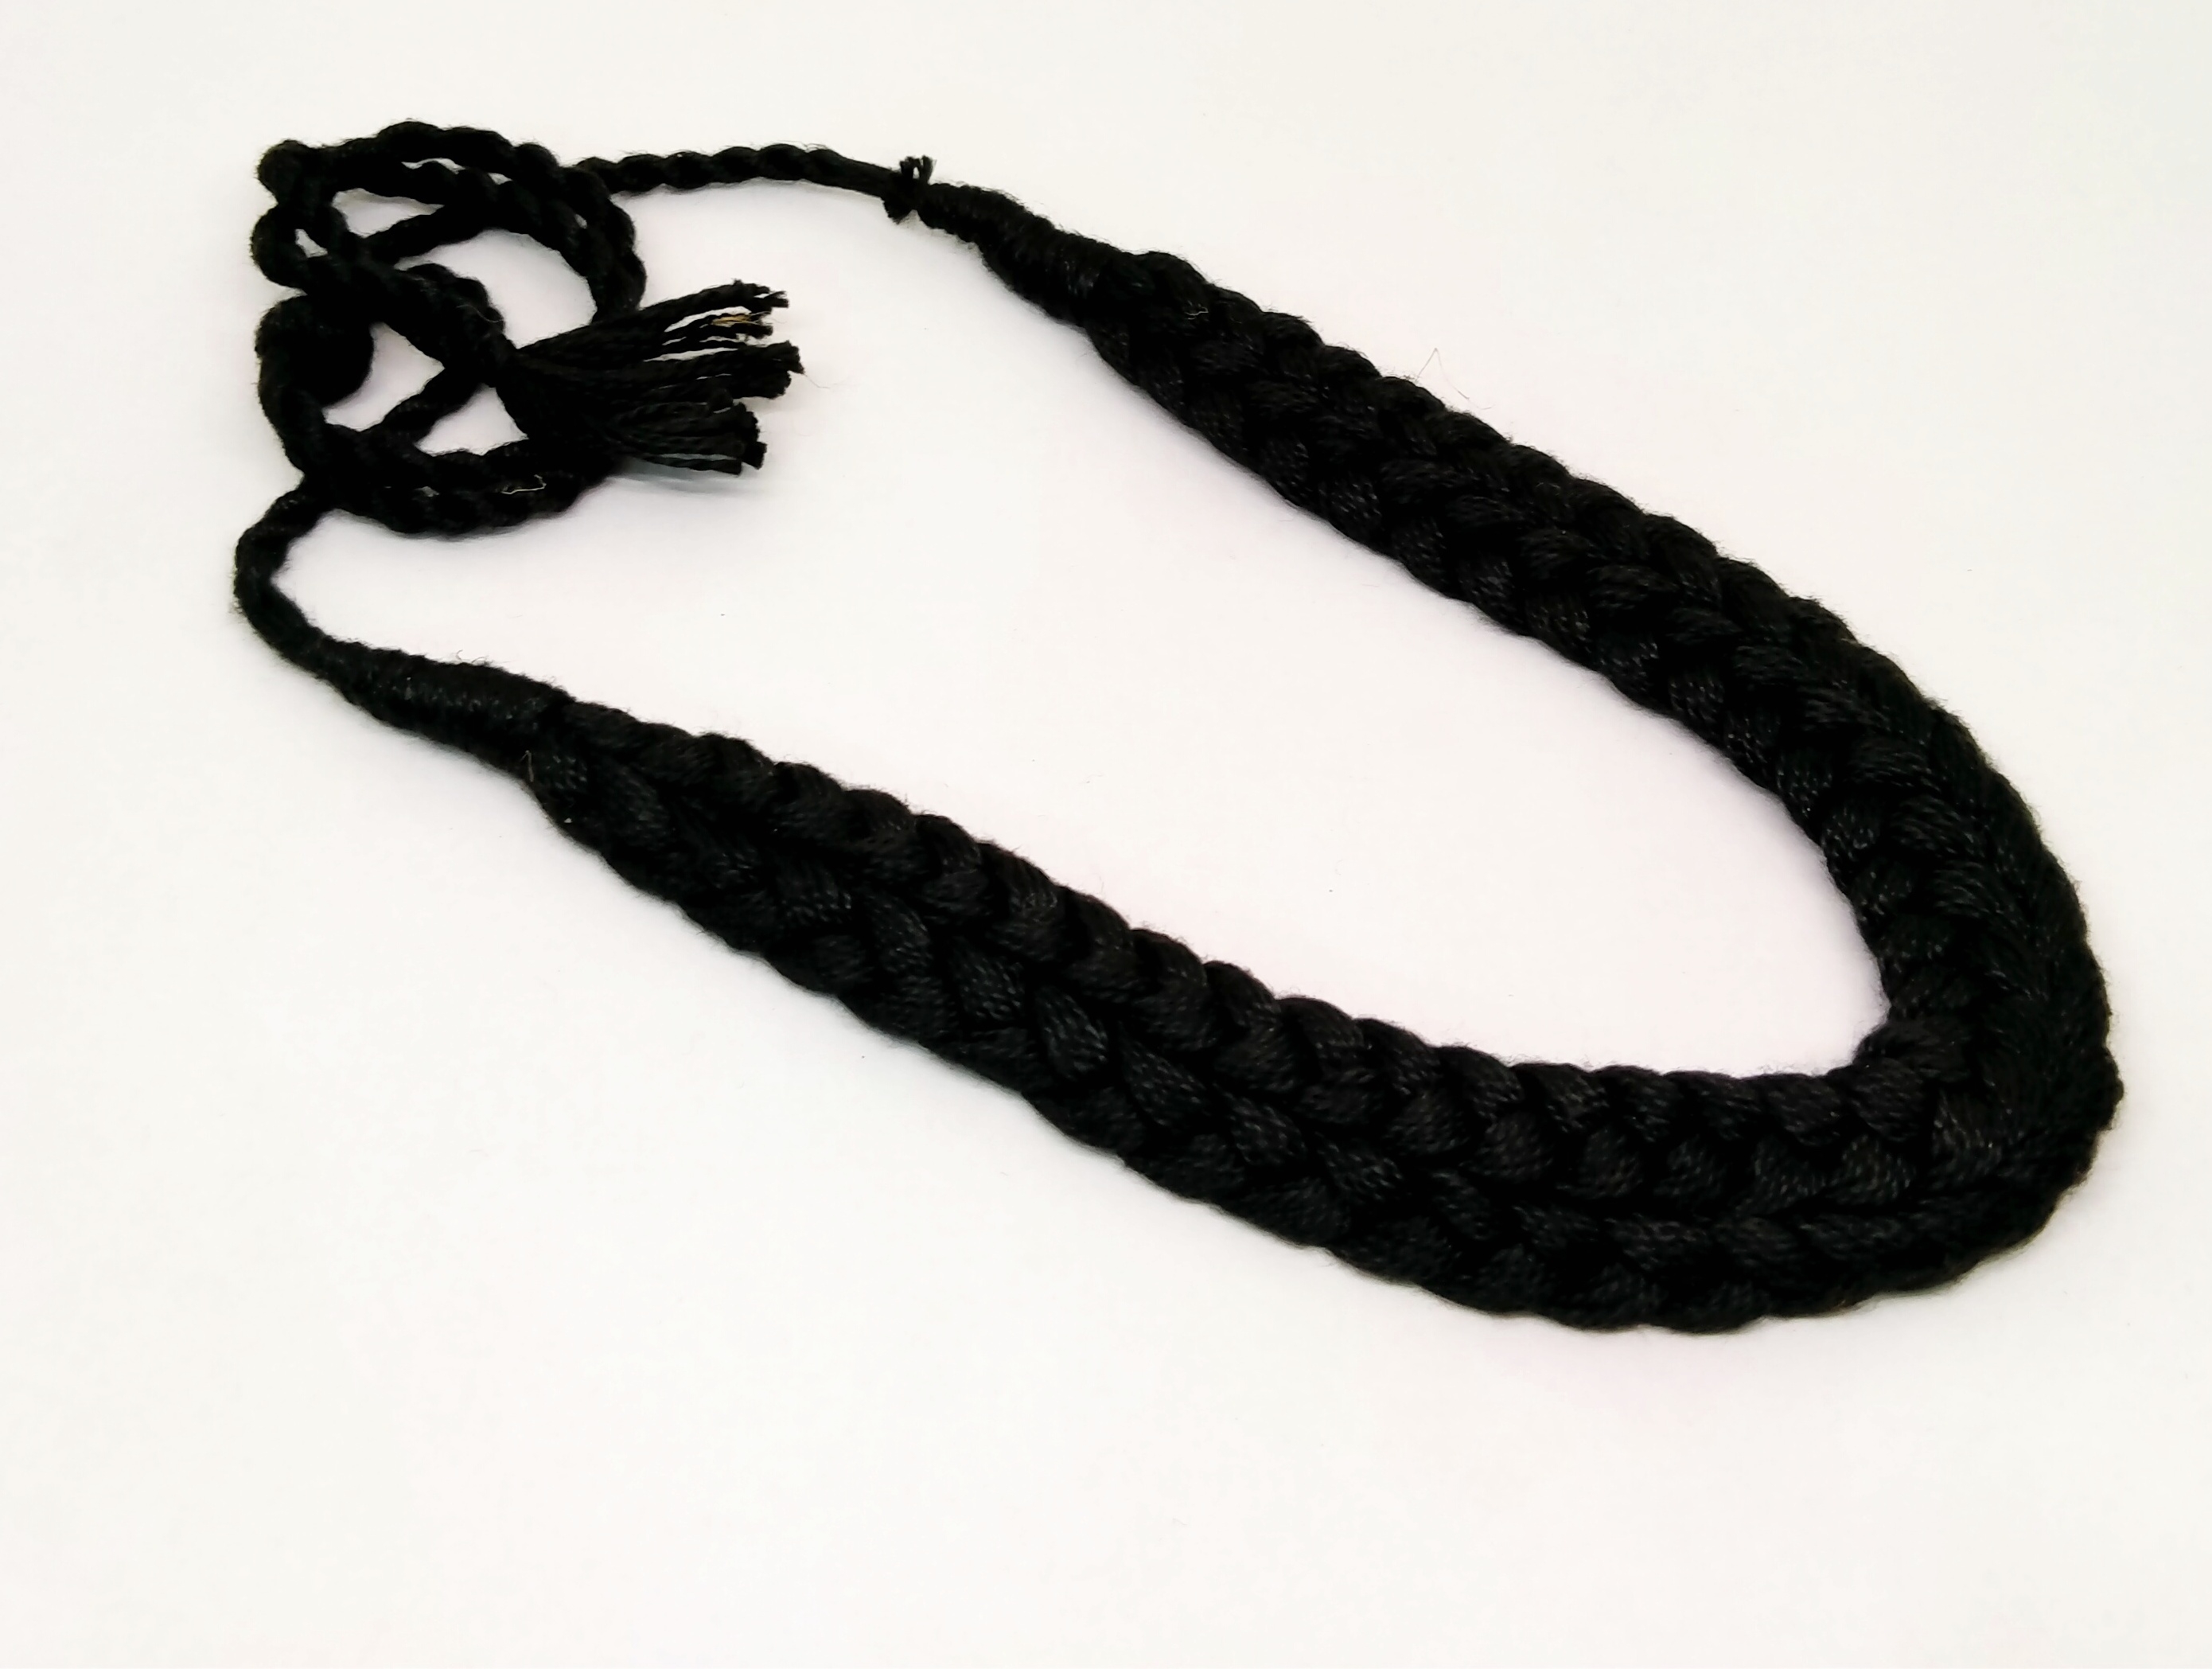 Loralyn Designs 24 Inch Men's Black Braided Leather Necklace Cord (3mm)  Stainless Steel Lobster Clasp : Amazon.in: Home & Kitchen